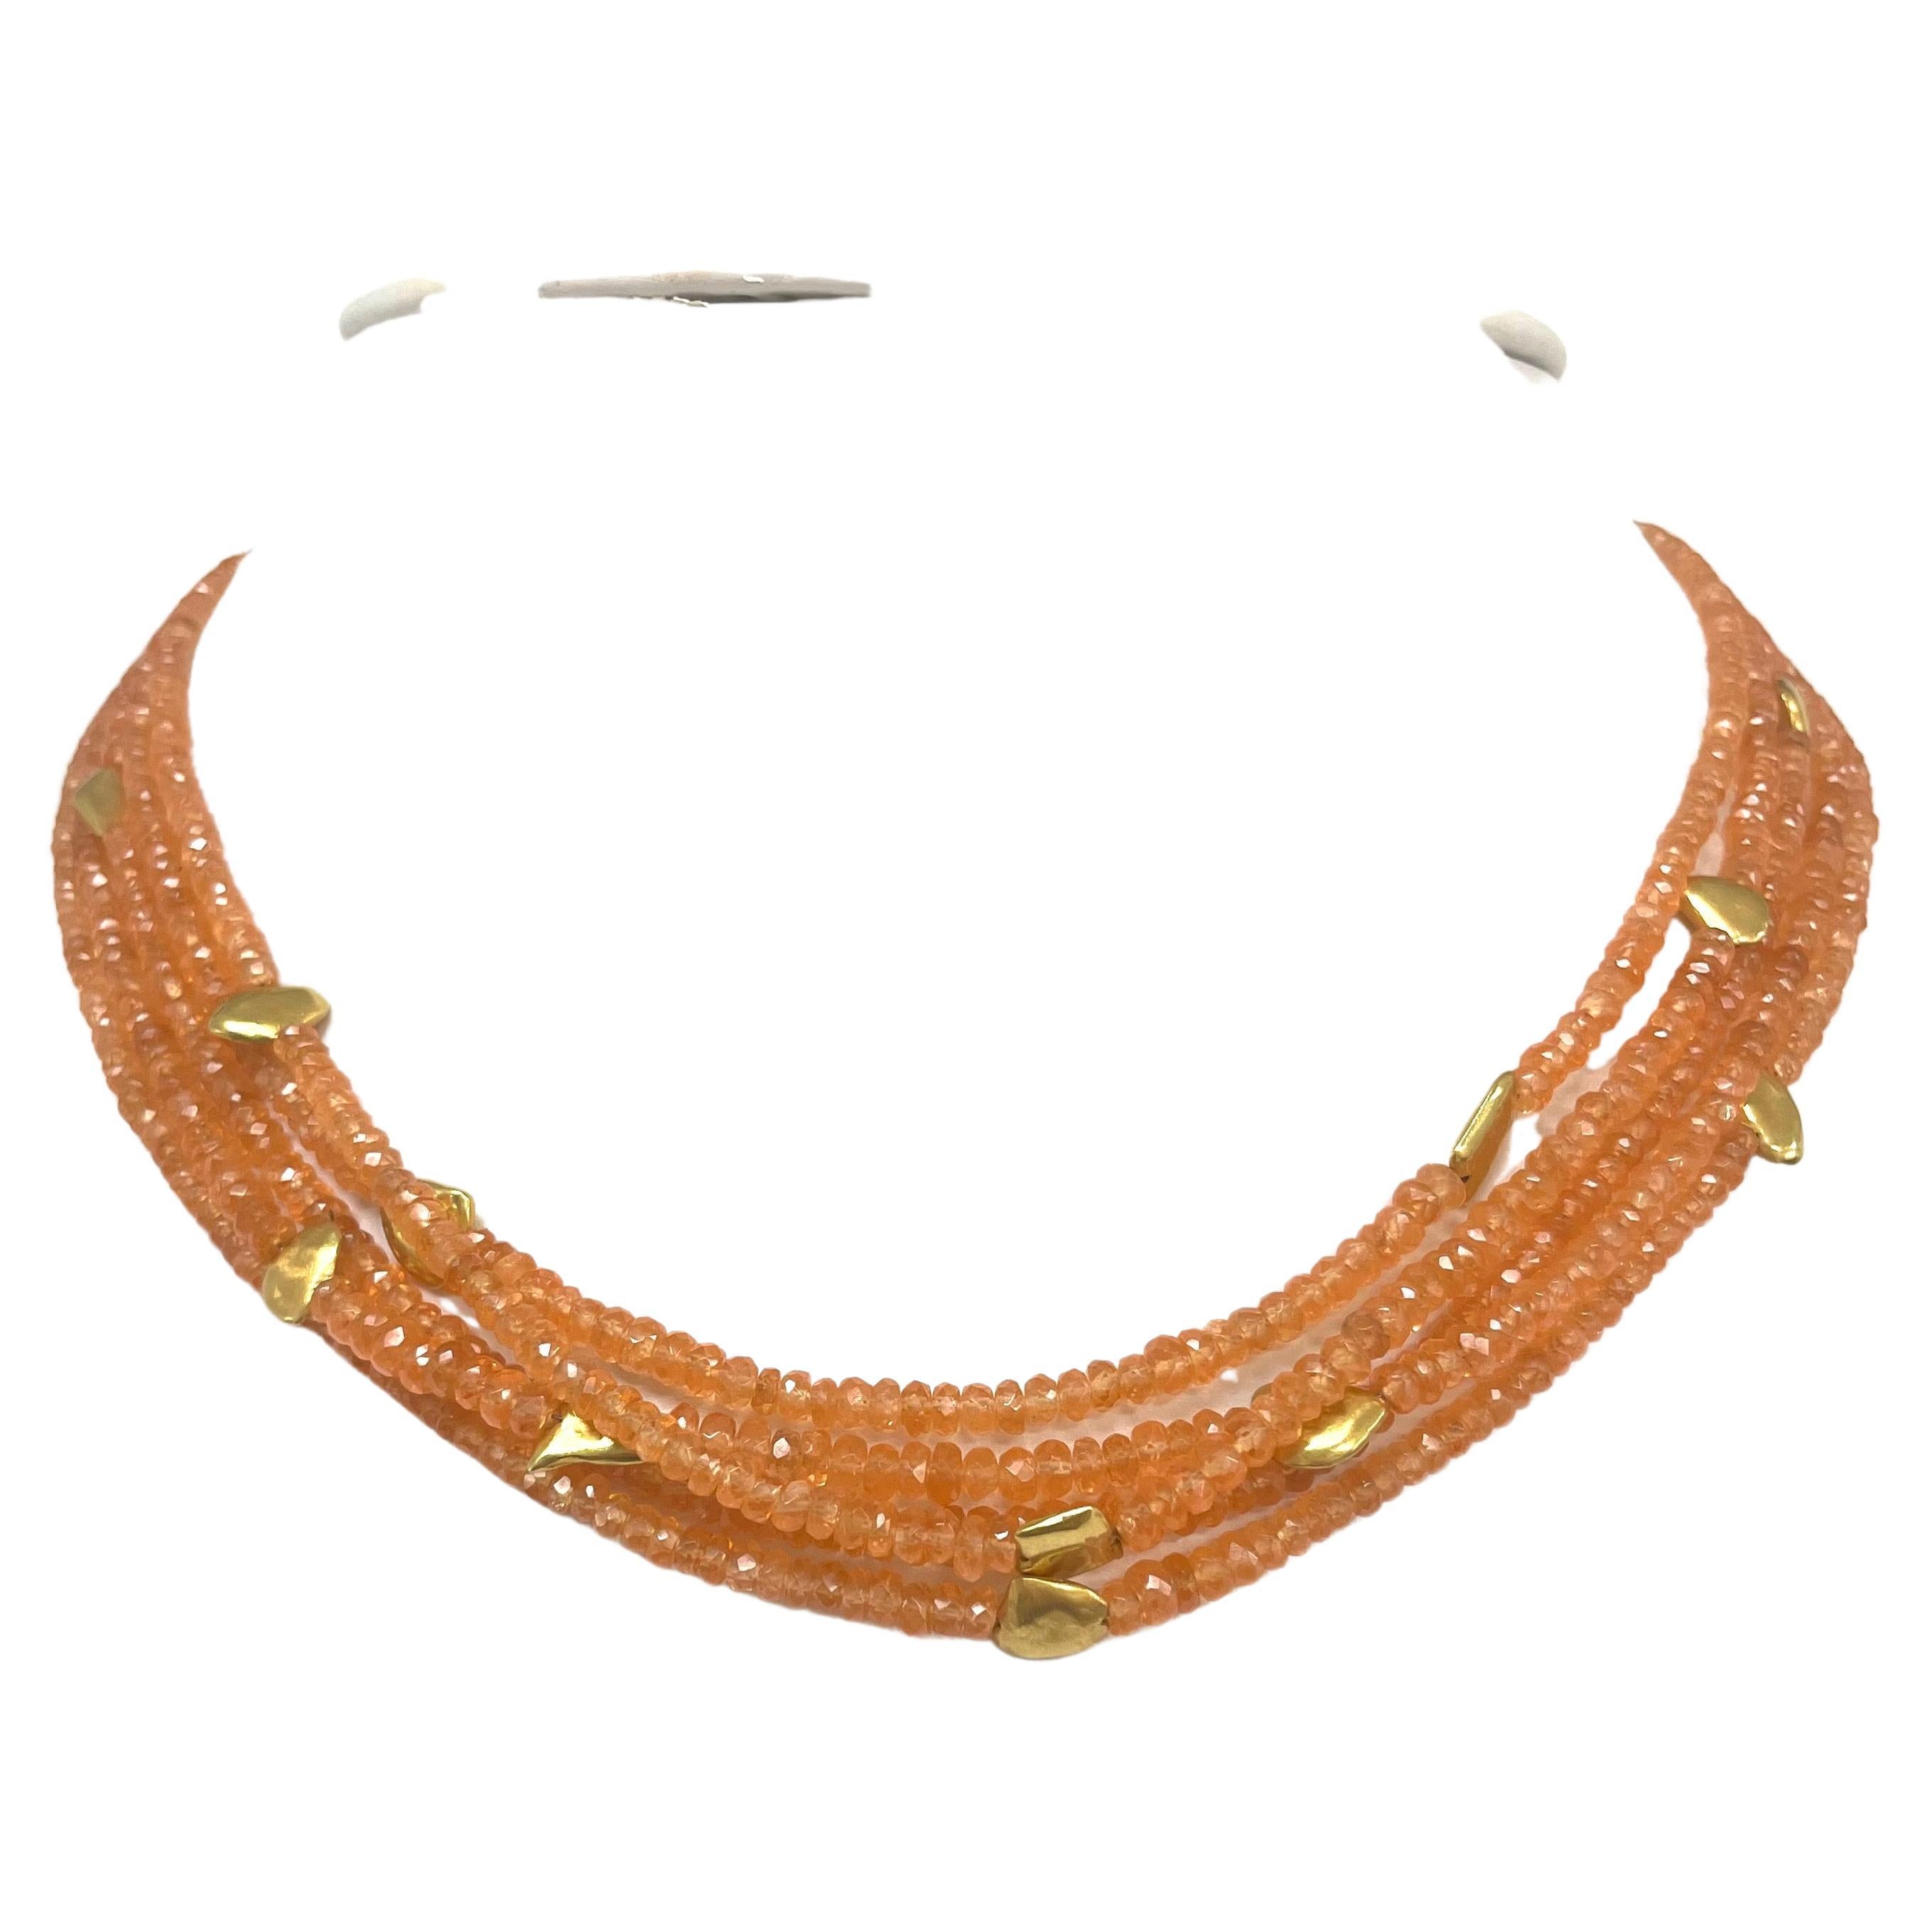  230 Carats Orange Spessartite Necklace with Gold Slices  In New Condition For Sale In Laguna Beach, CA